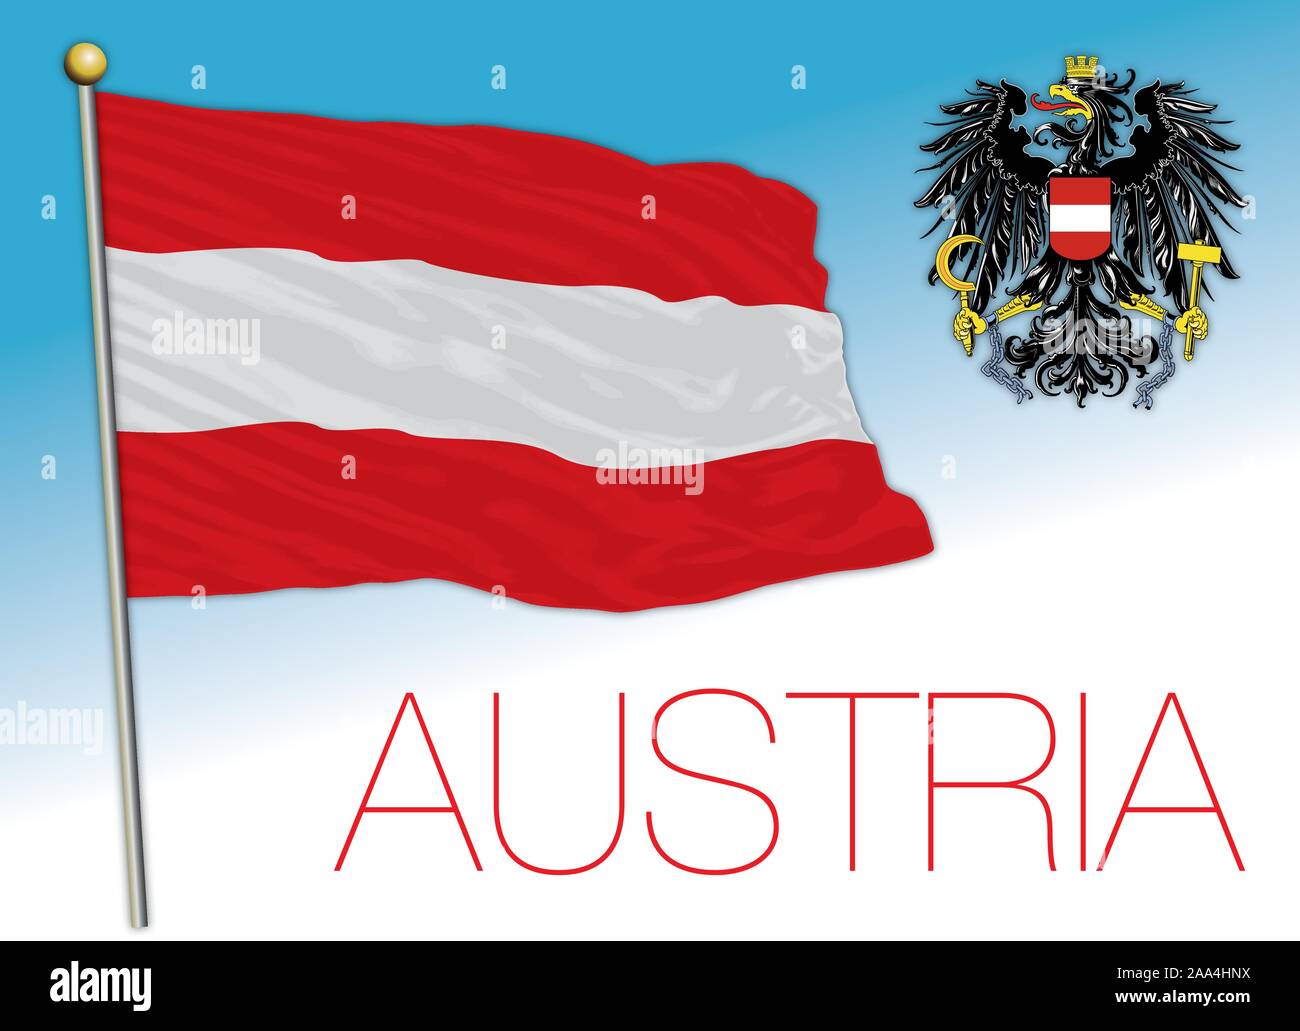 Austria official national flag and coat of arms, vector illustration Stock Vector